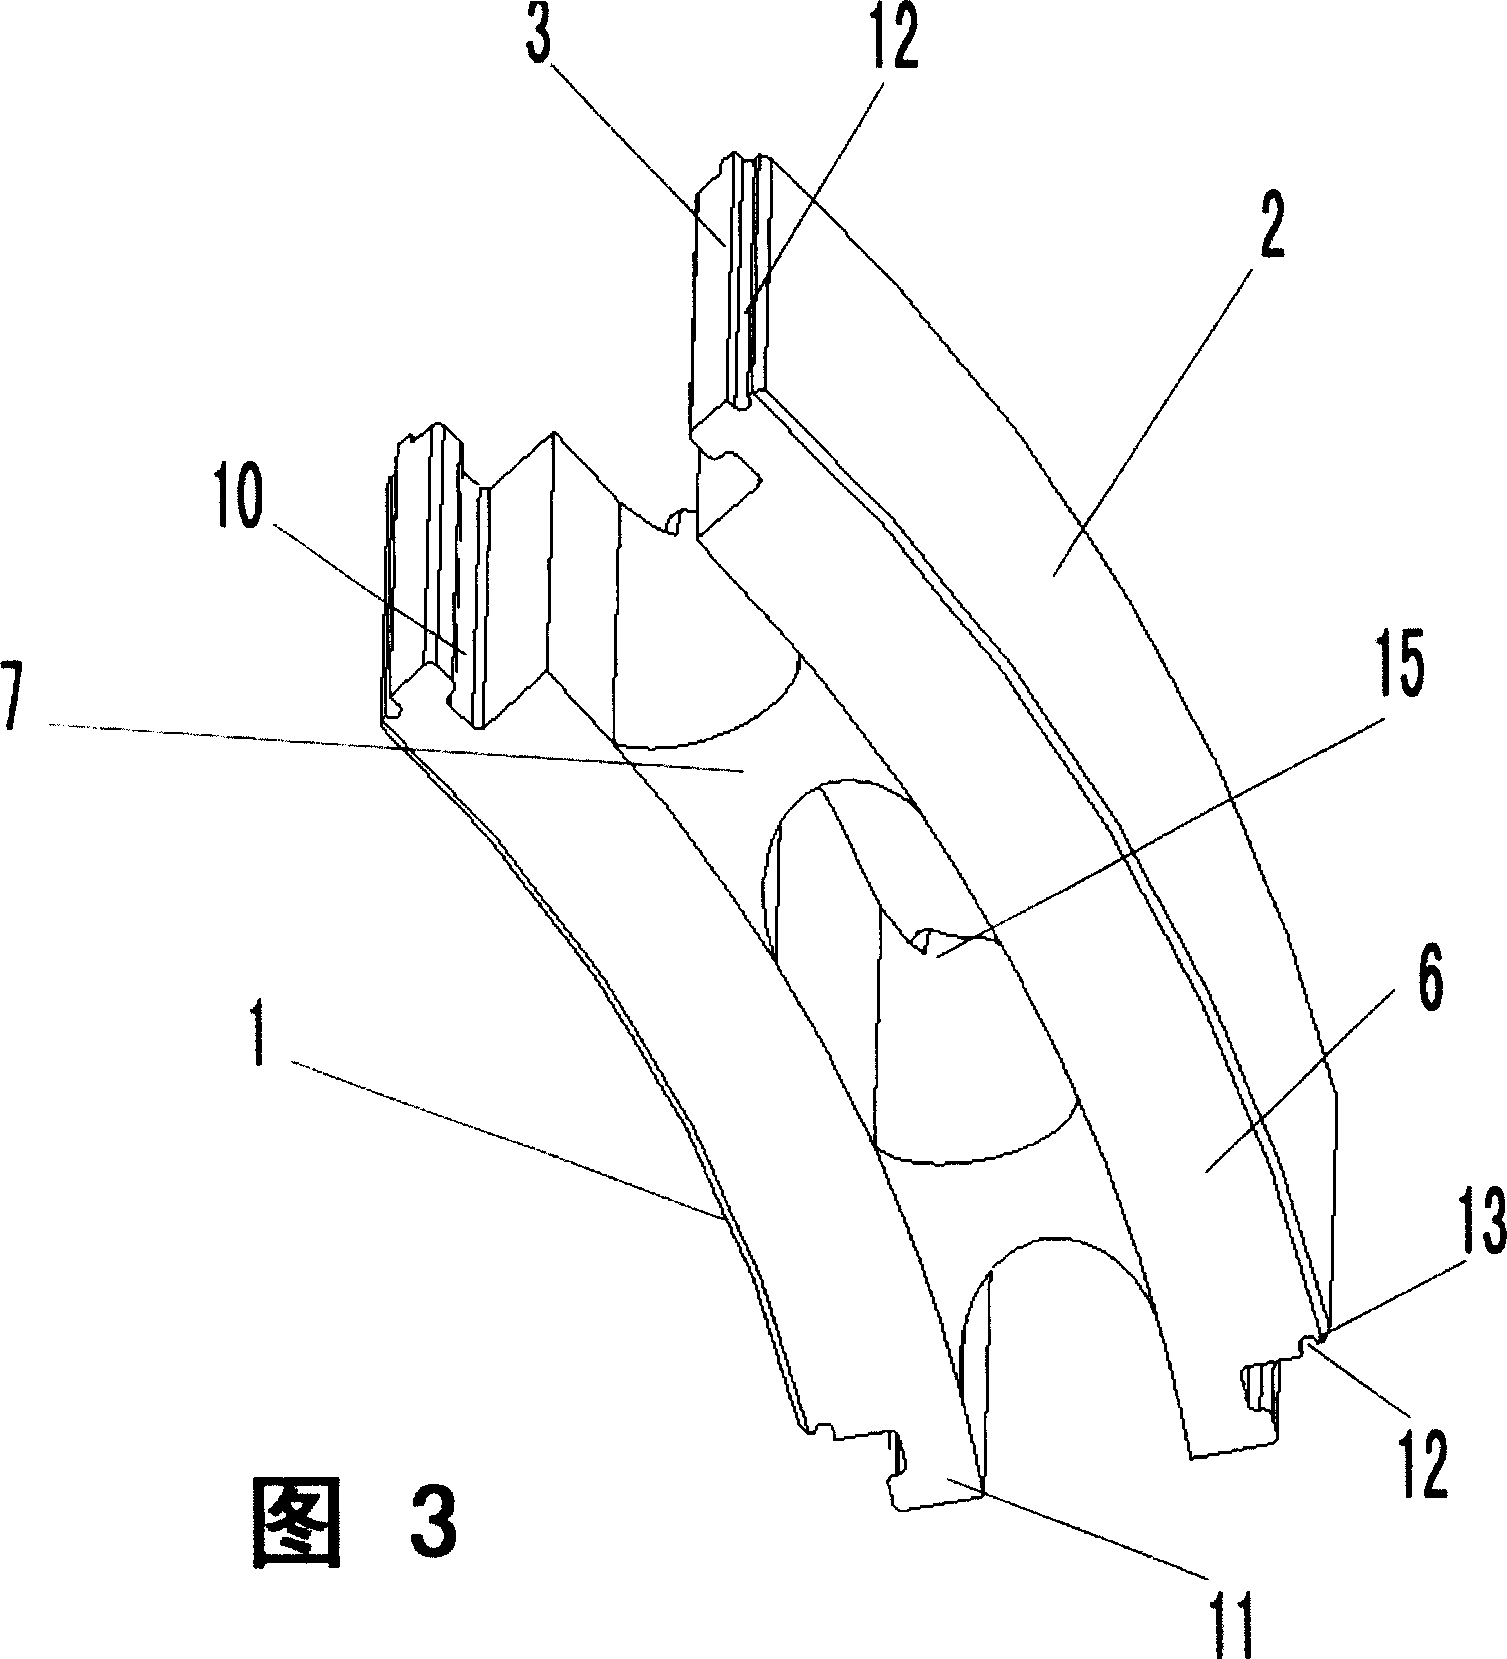 Wall module of well walls and method for building wall bodies of well walls by using module